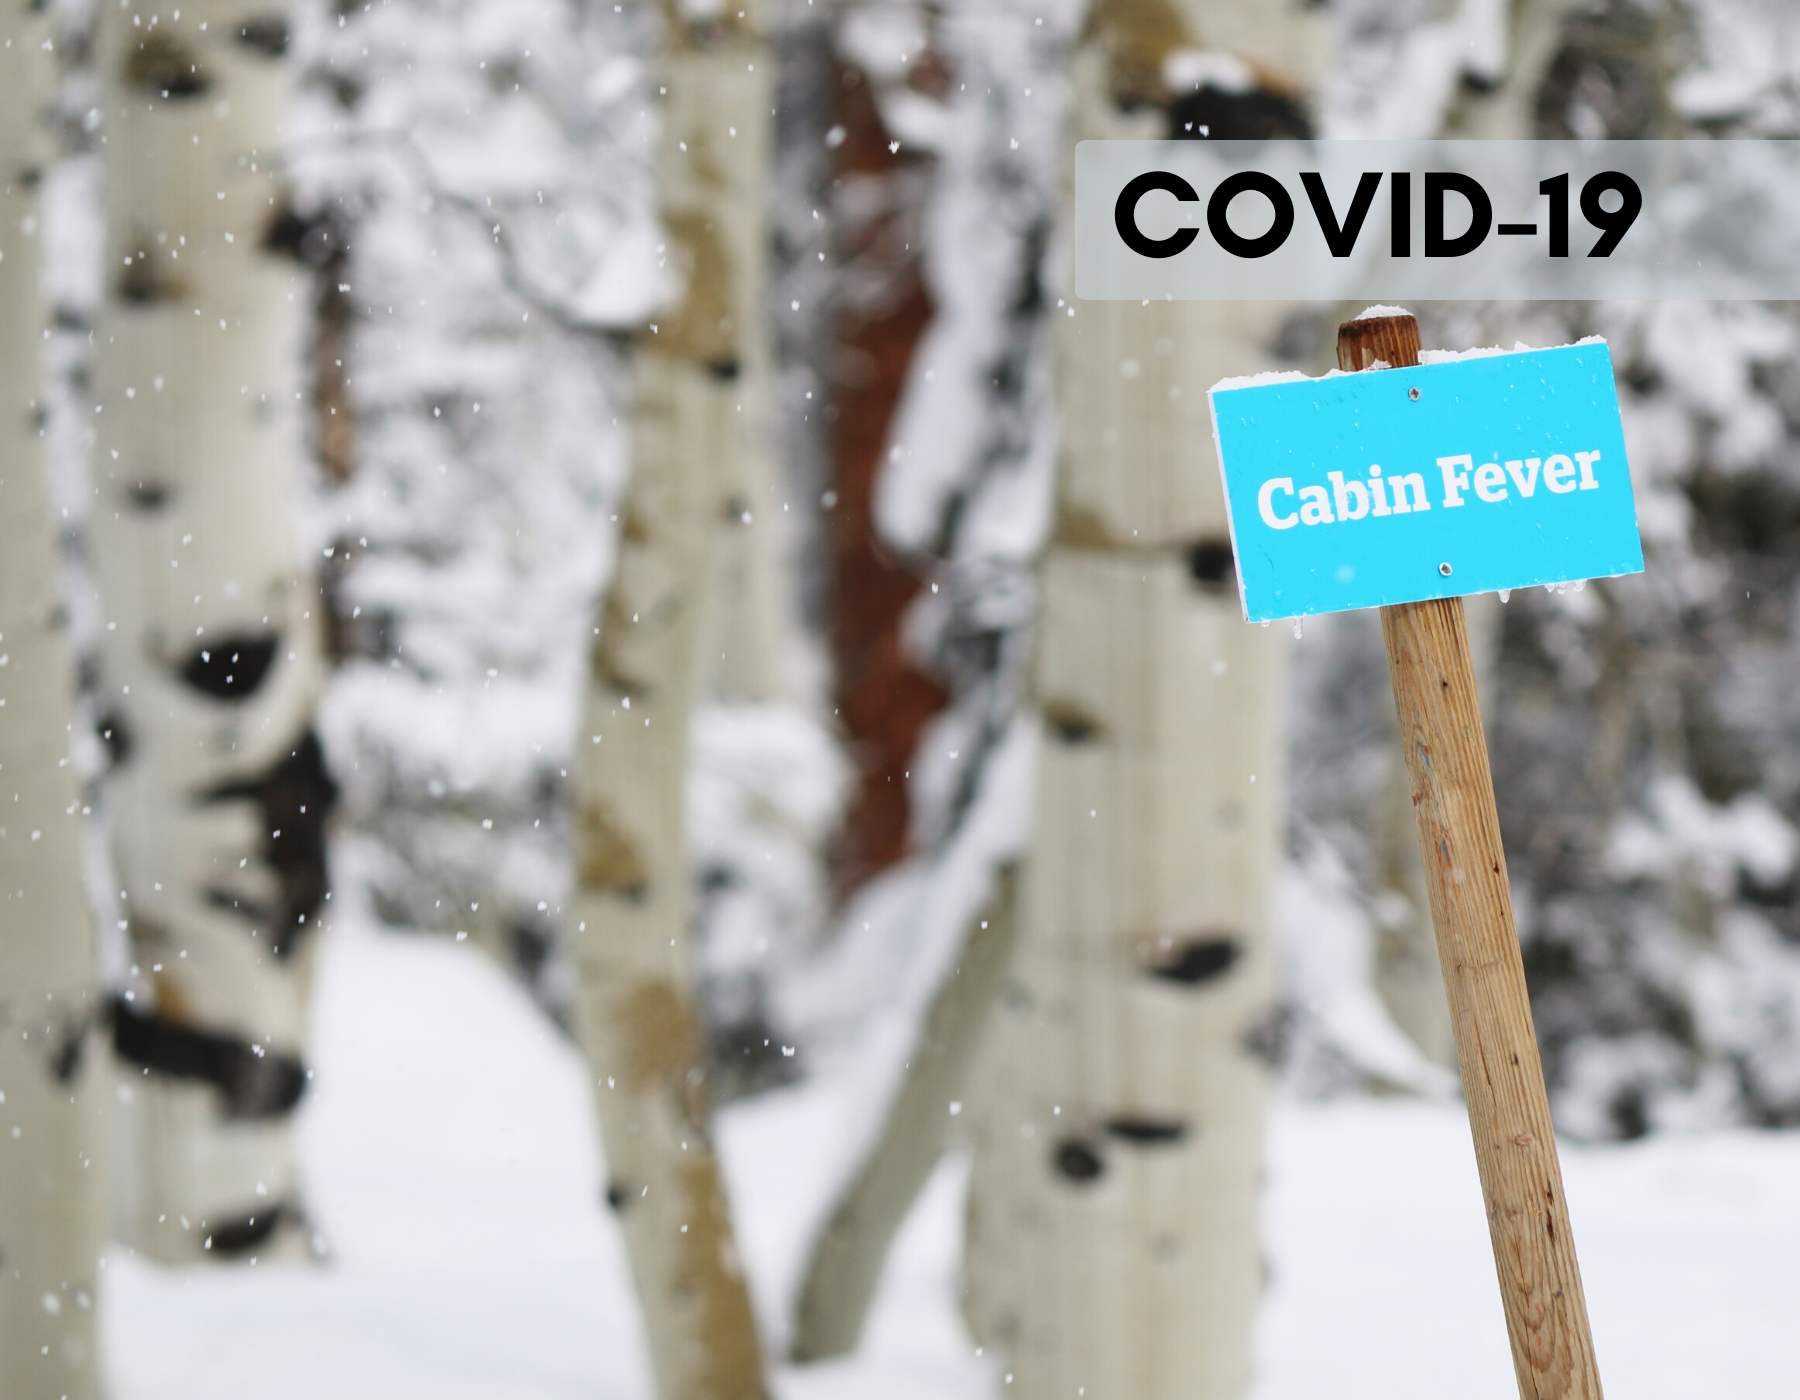 Covid-19 cabin fever graphic with snowy forest.